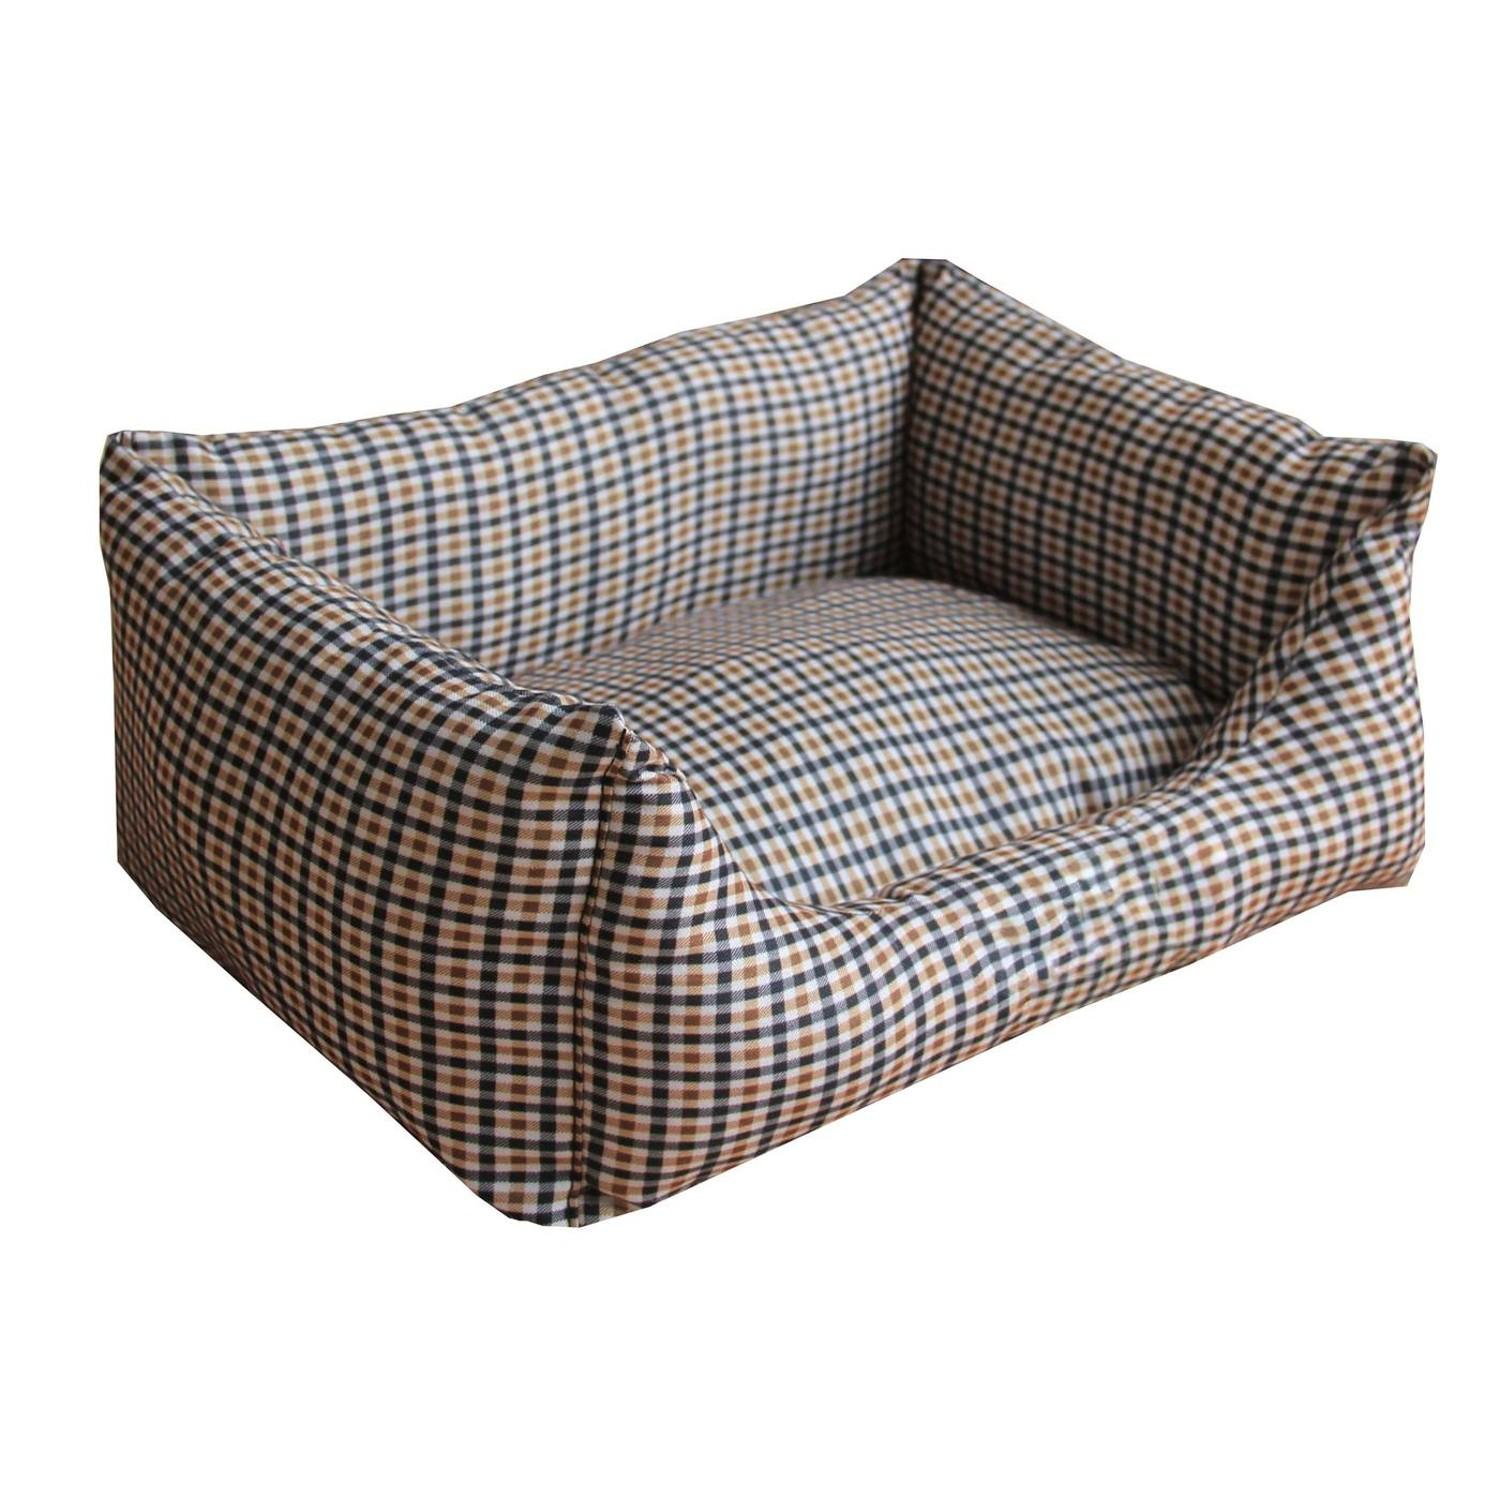 Pet Life Wick-Away Anti-Bacterial Water Resistant Rectangular Dog Bed - Light Brown and Blue Plaid